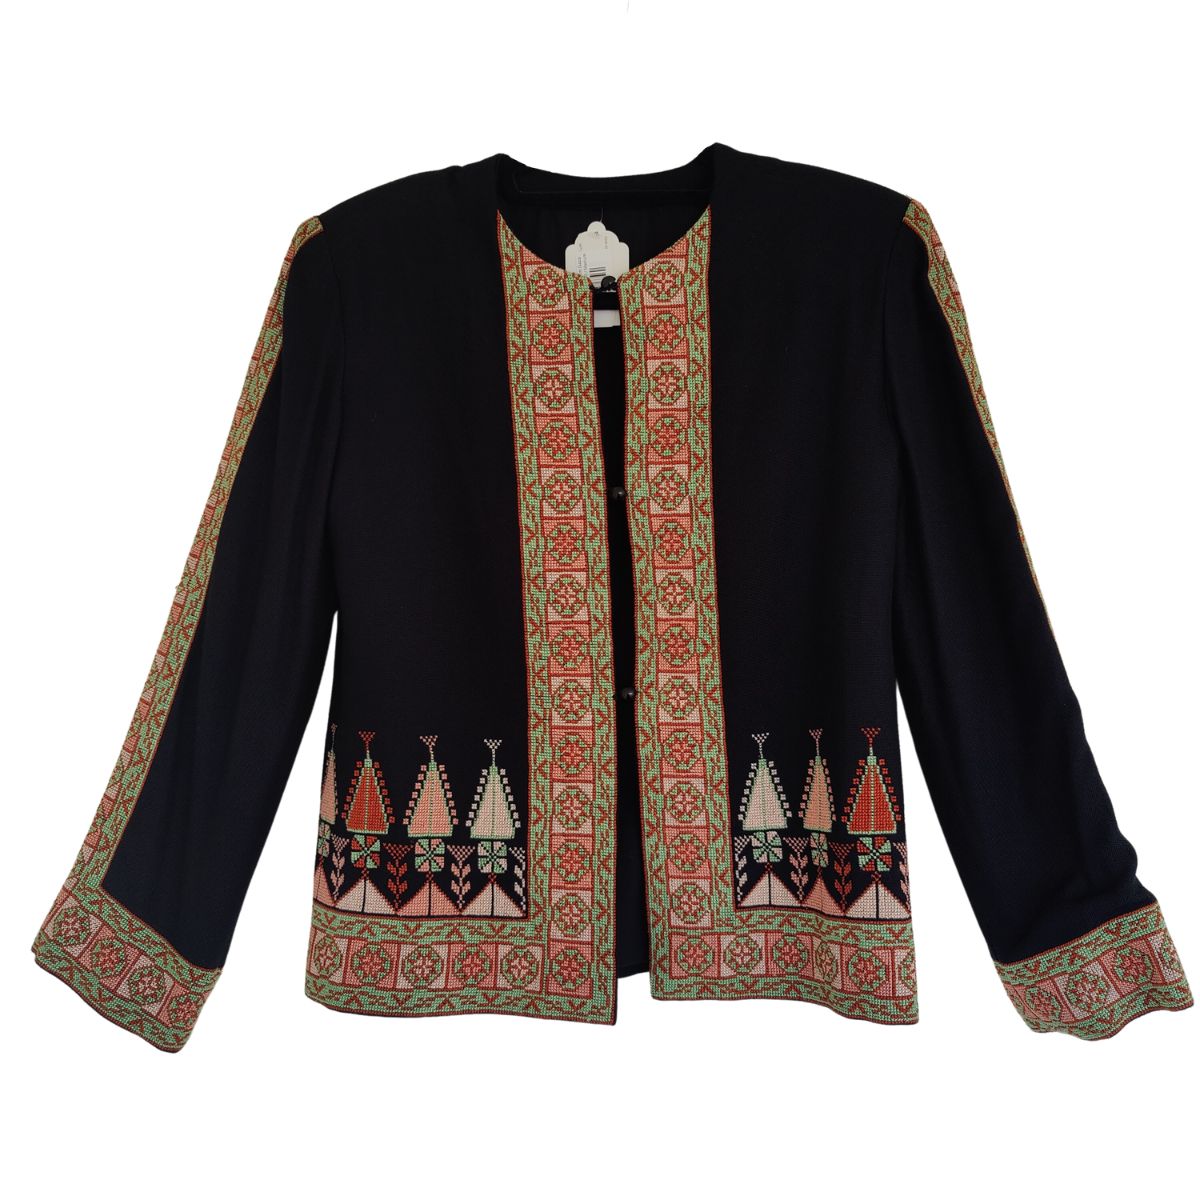 Embroidered Jacket from Gaza